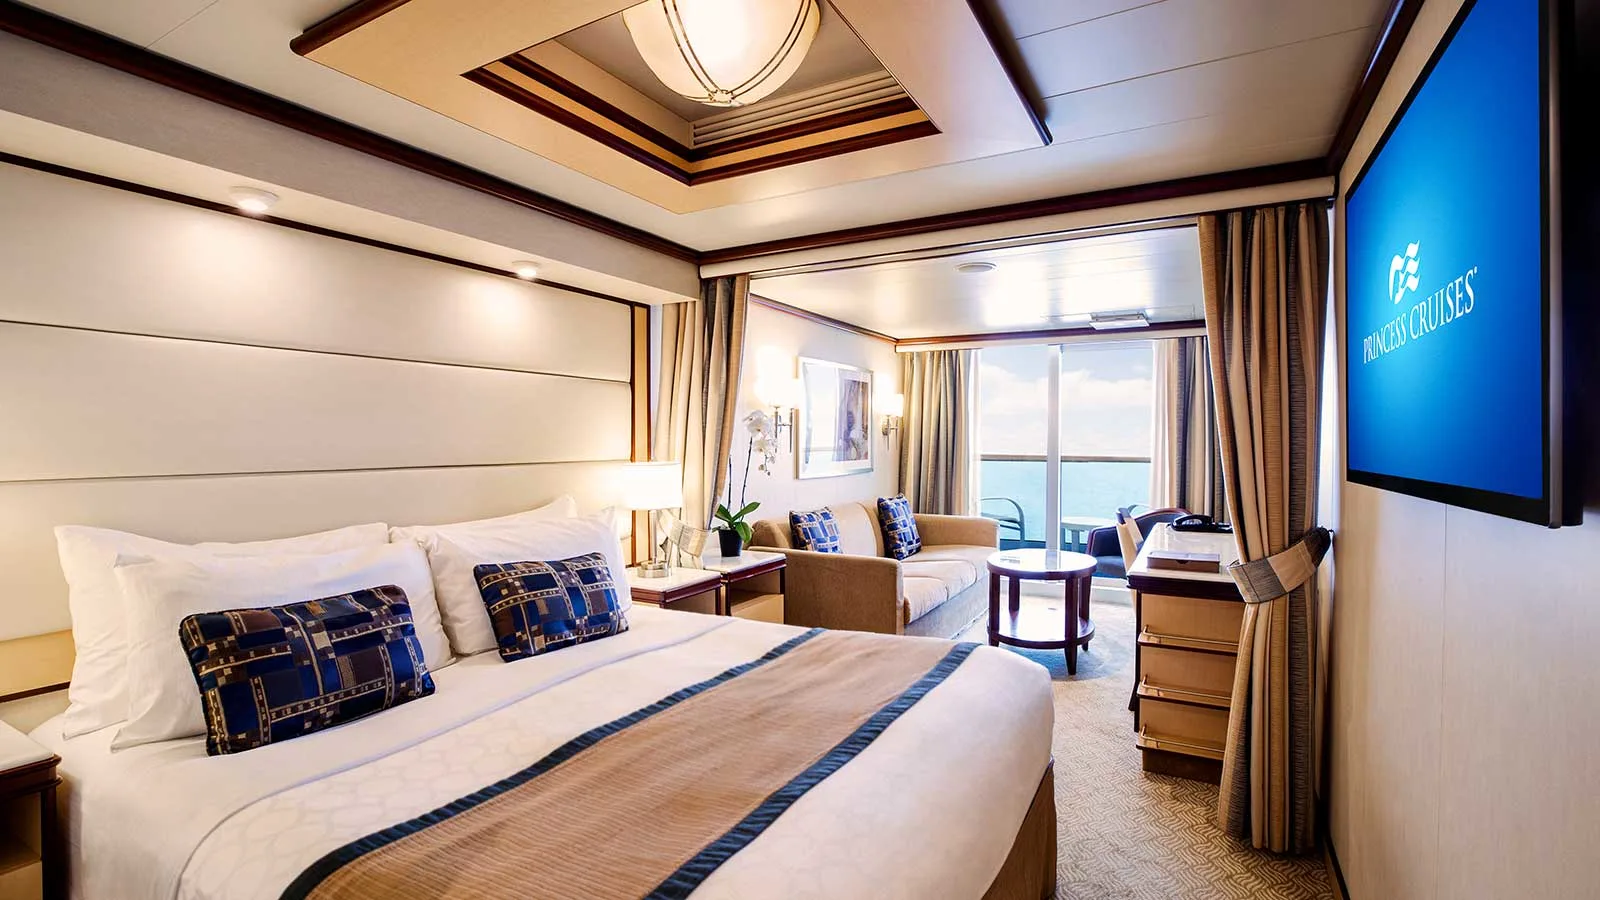 Image of Mini-suite Accommodation, sourced from: Princess Cruise Lines https://touristwire.com/wp-content/uploads/2023/06/royal-class-mini-suite-1600.jpg